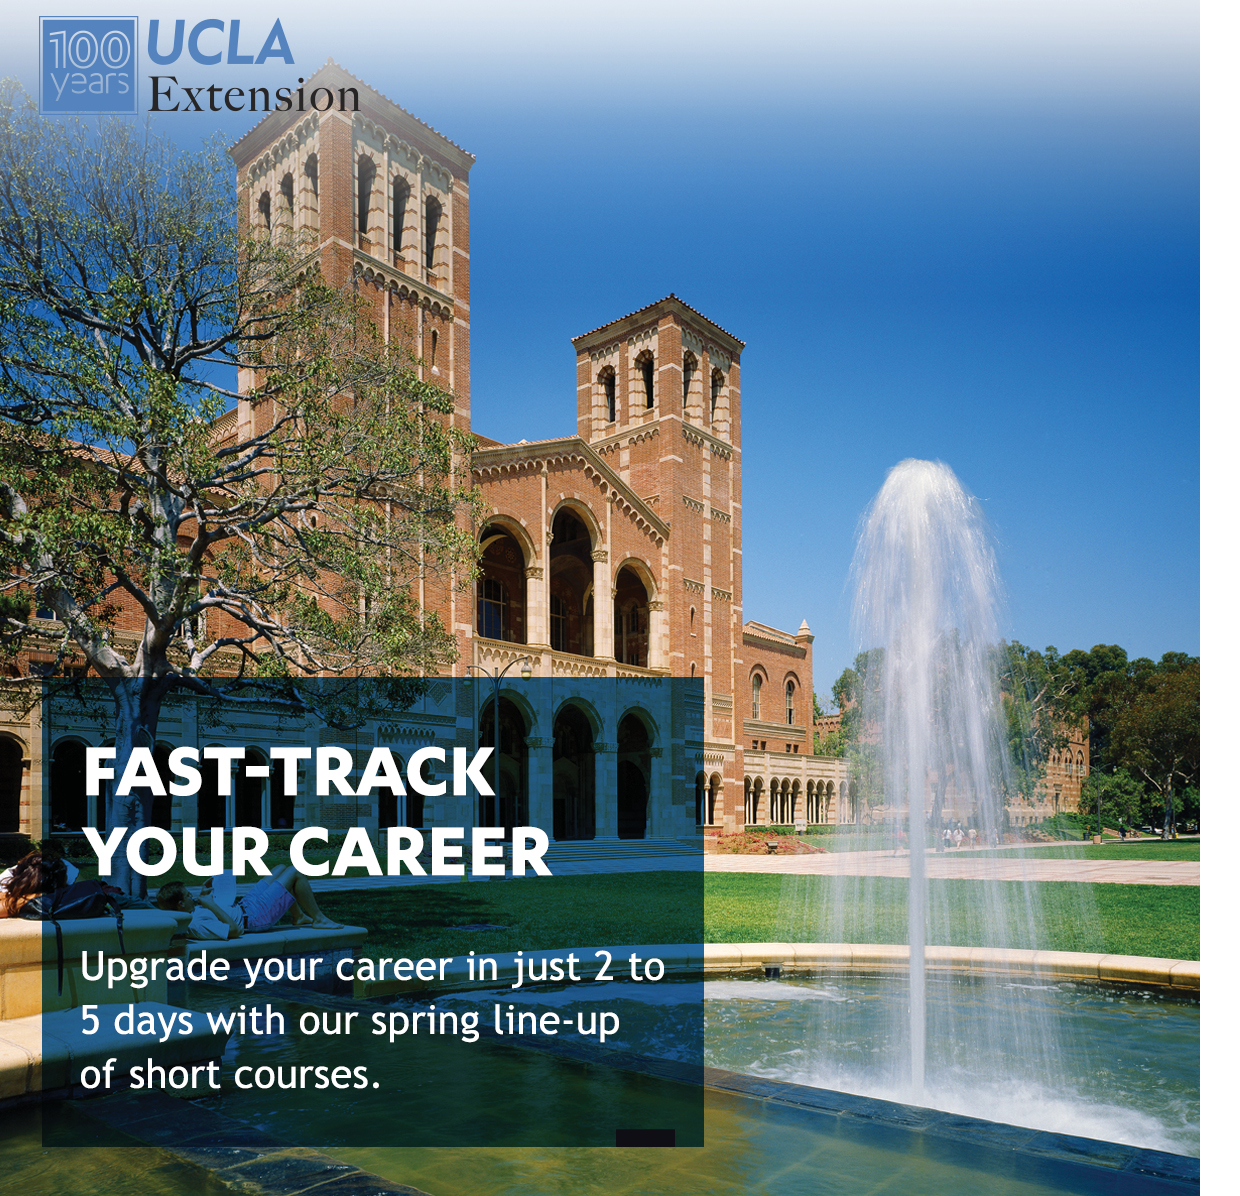 UCLA Extension email campaign